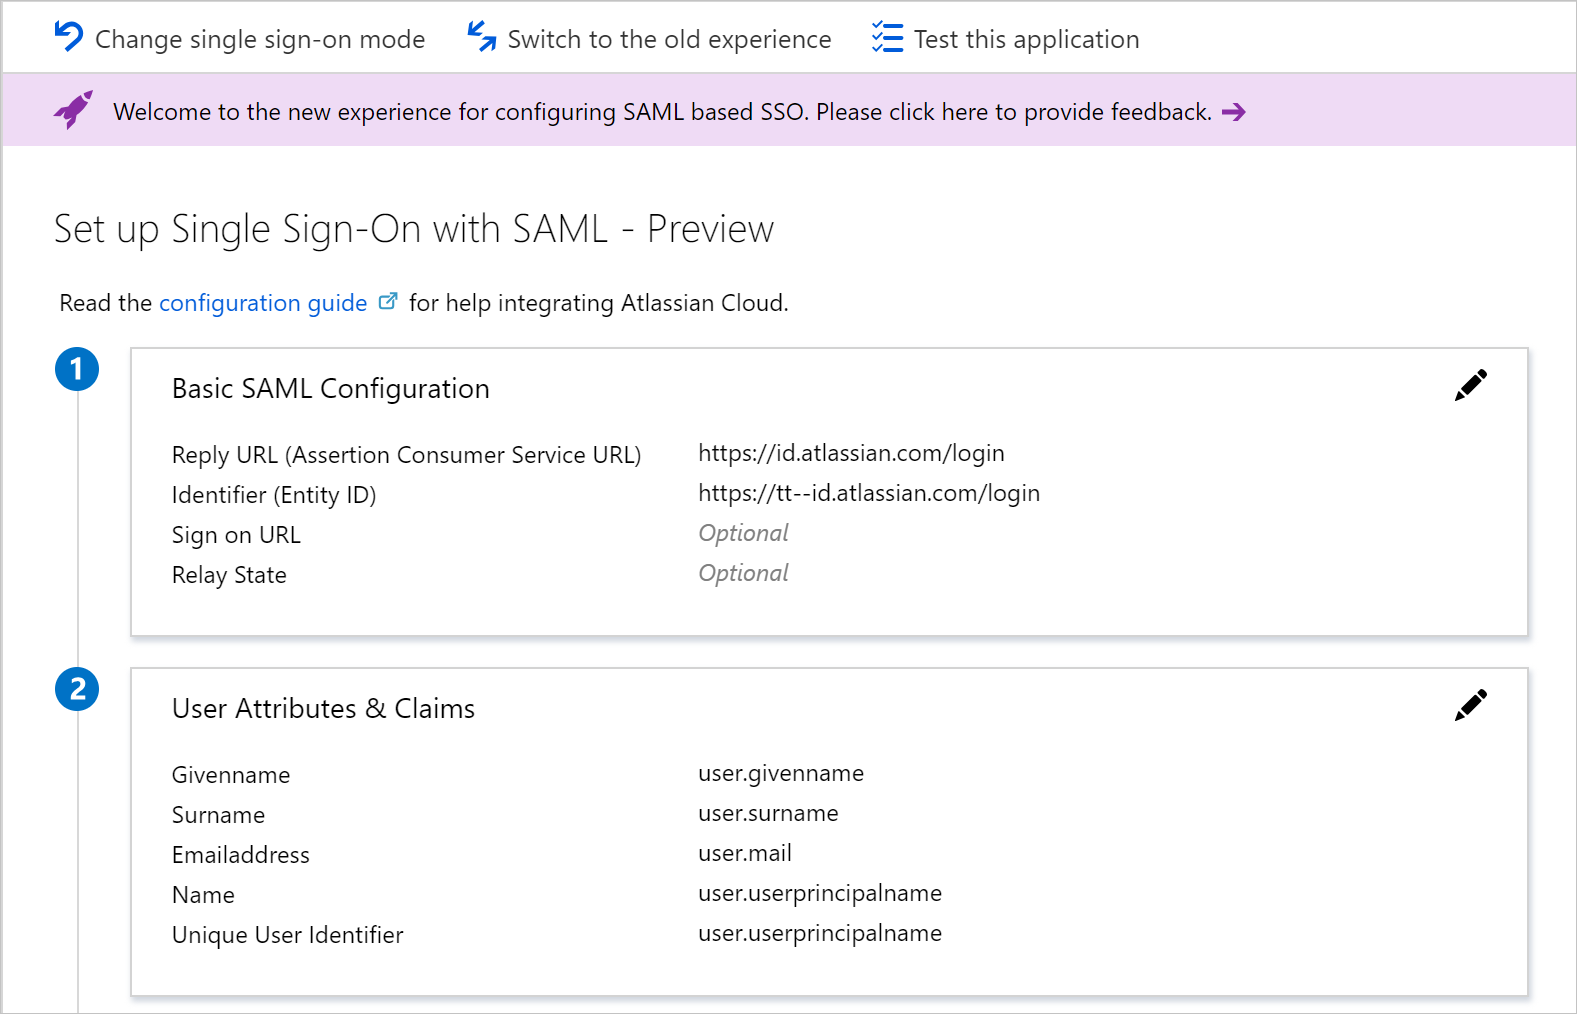 Open the User Attributes & Claims section in the Azure portal